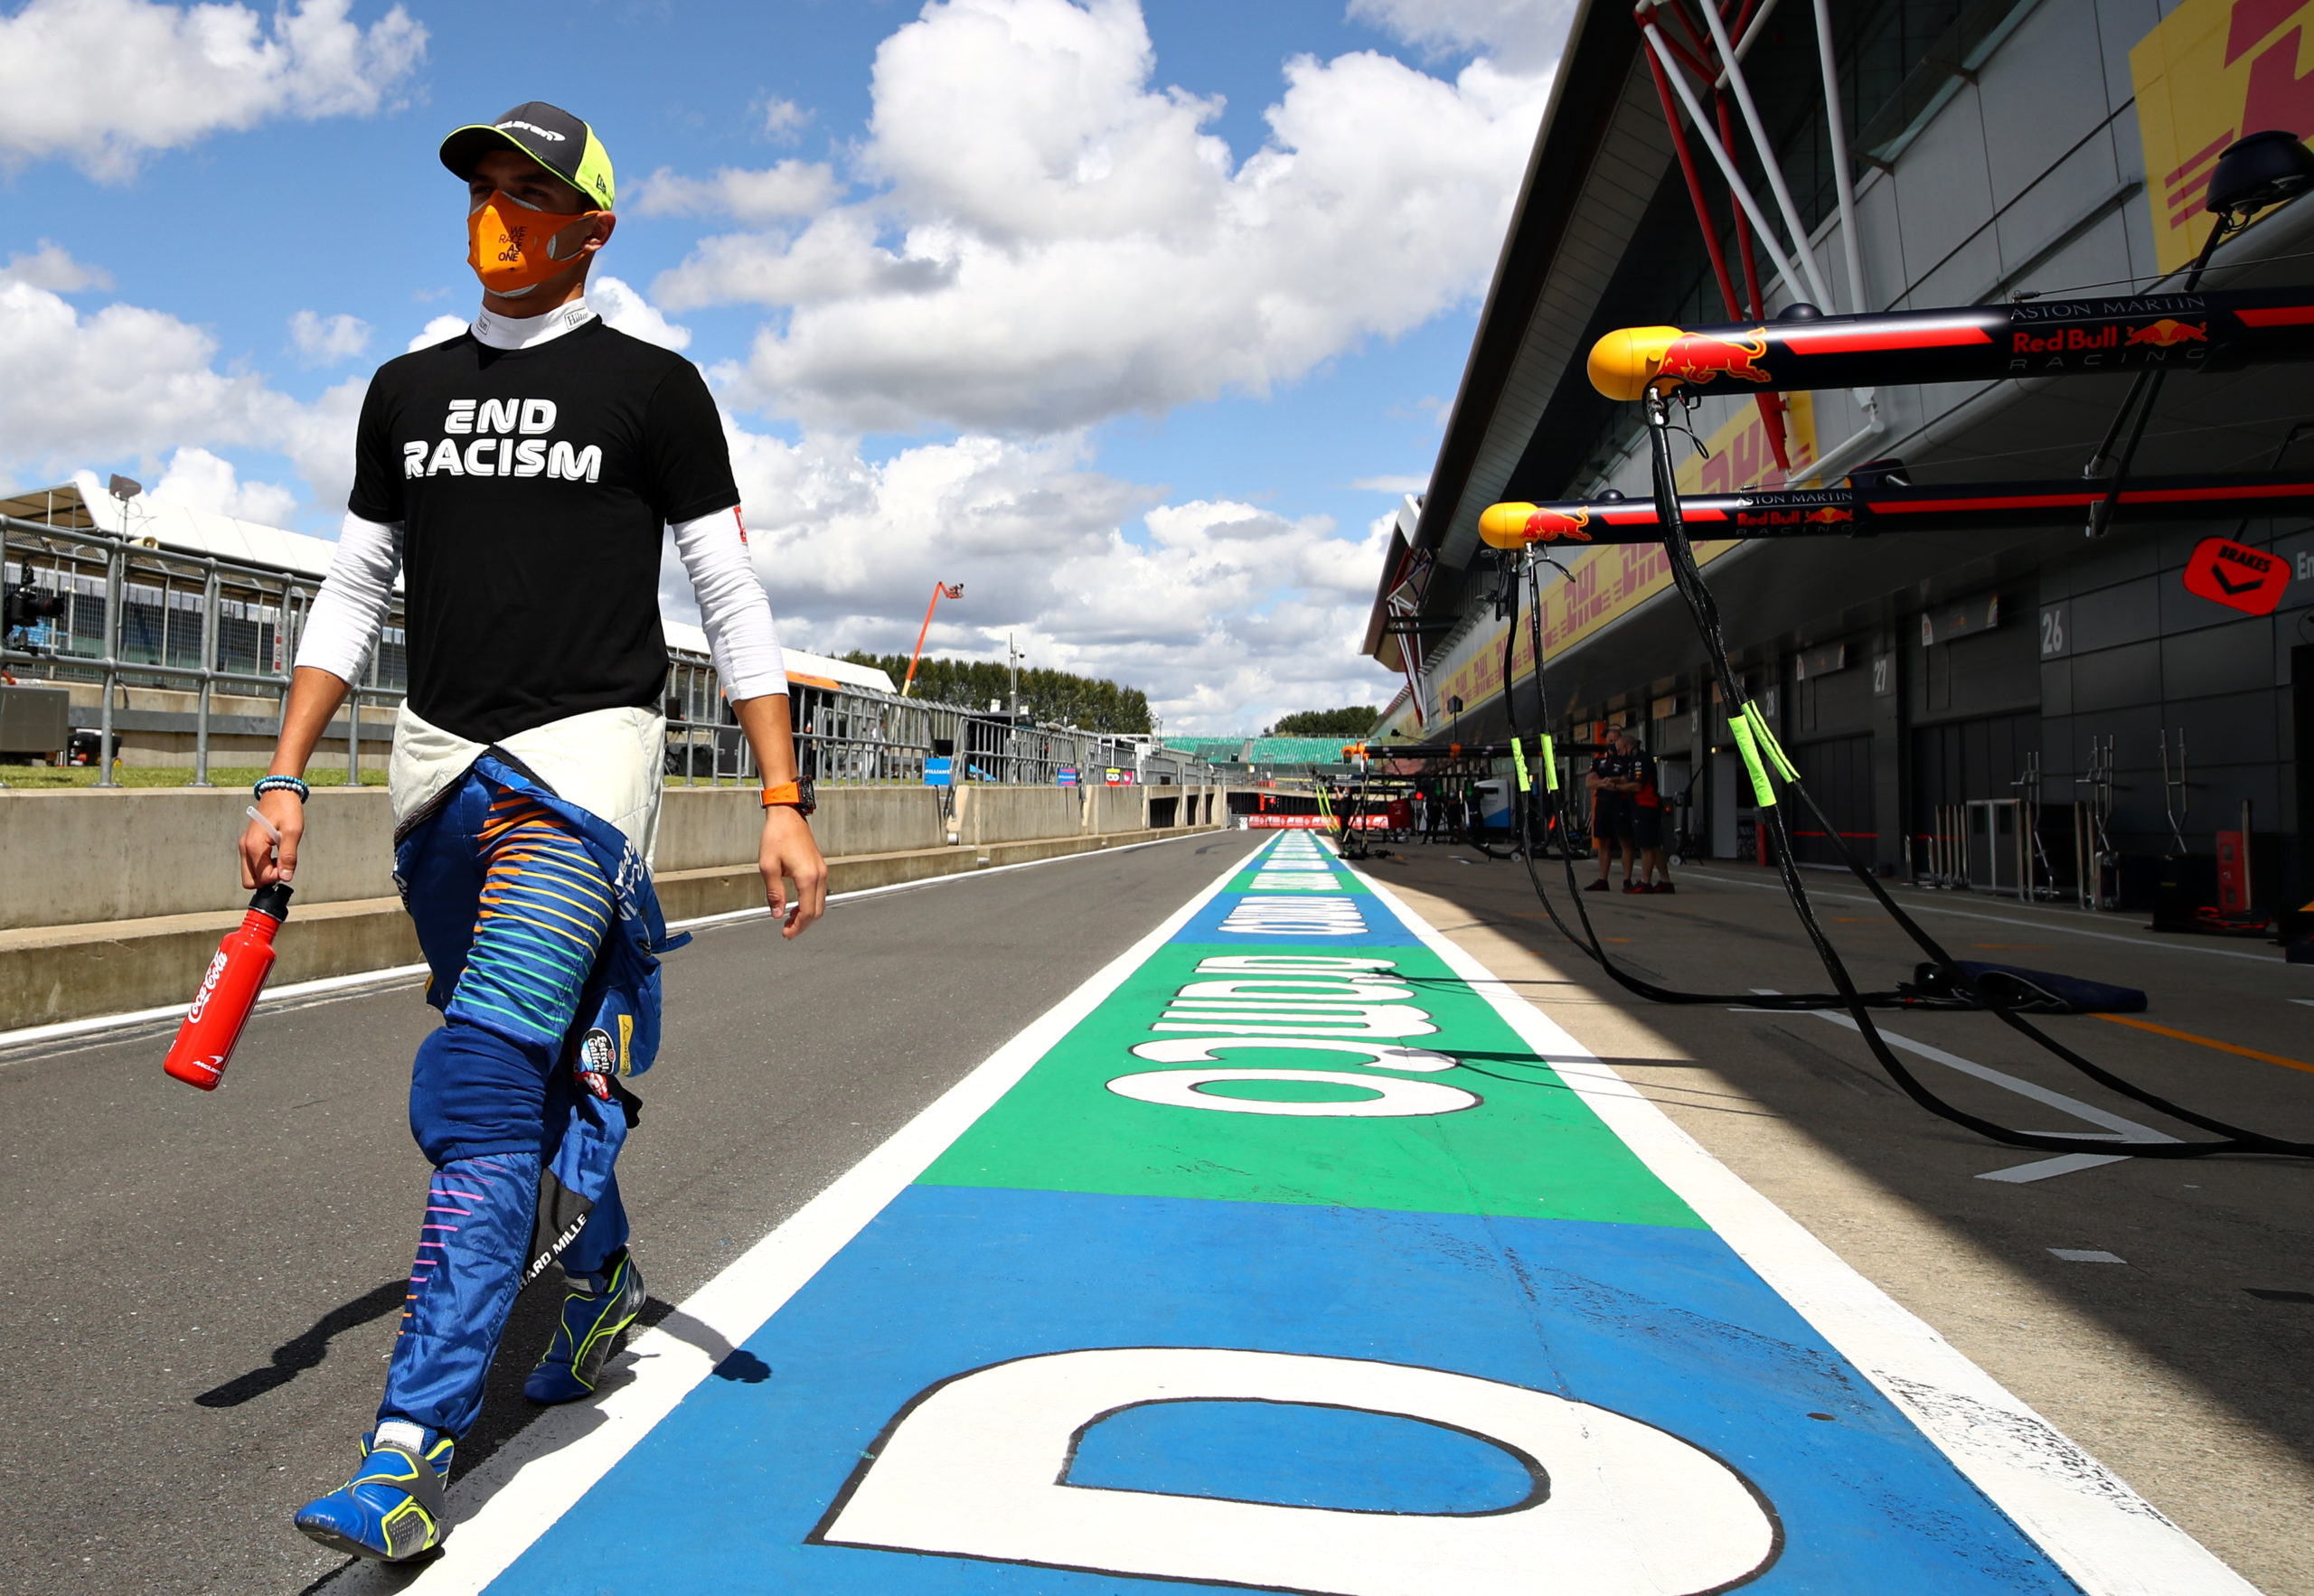  Lando Norris of Great Britain and McLaren F1 walks to the grid before the F1 Grand Prix of Great Britain at Silverstone on August 2